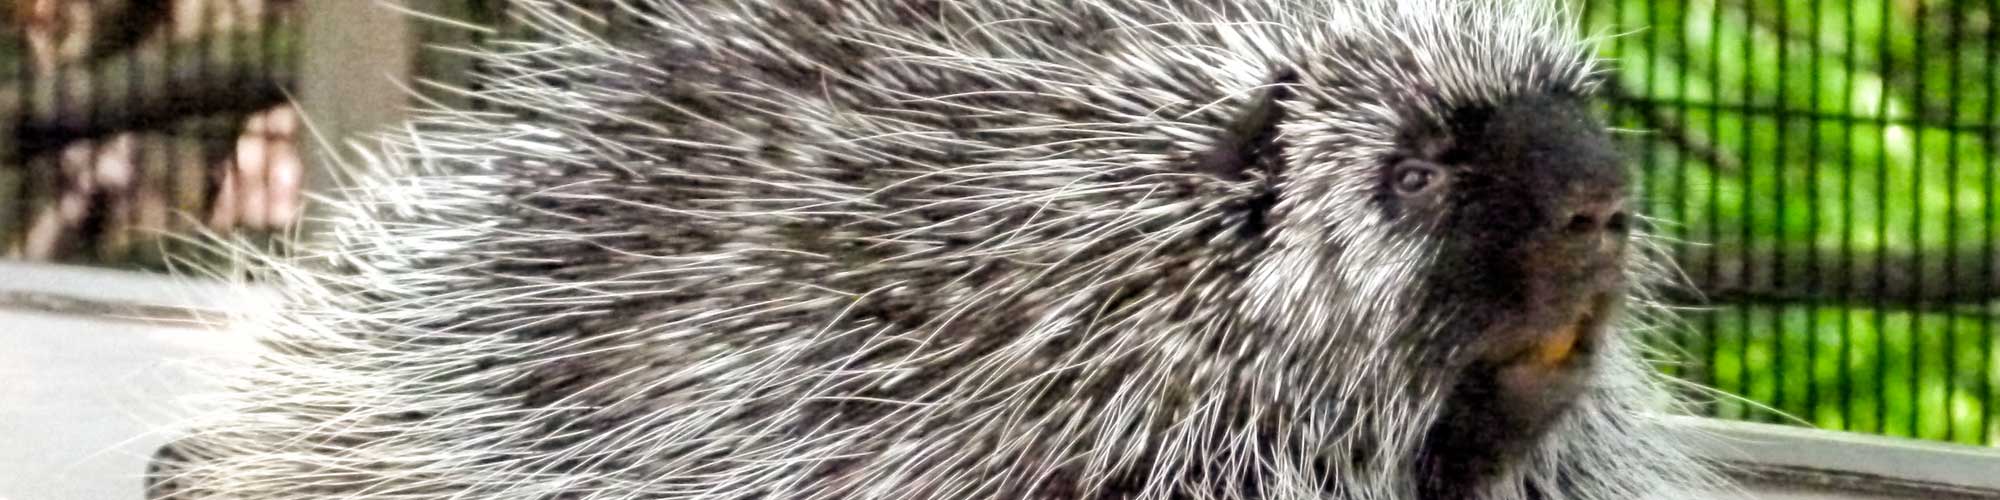 Porcupine face and body